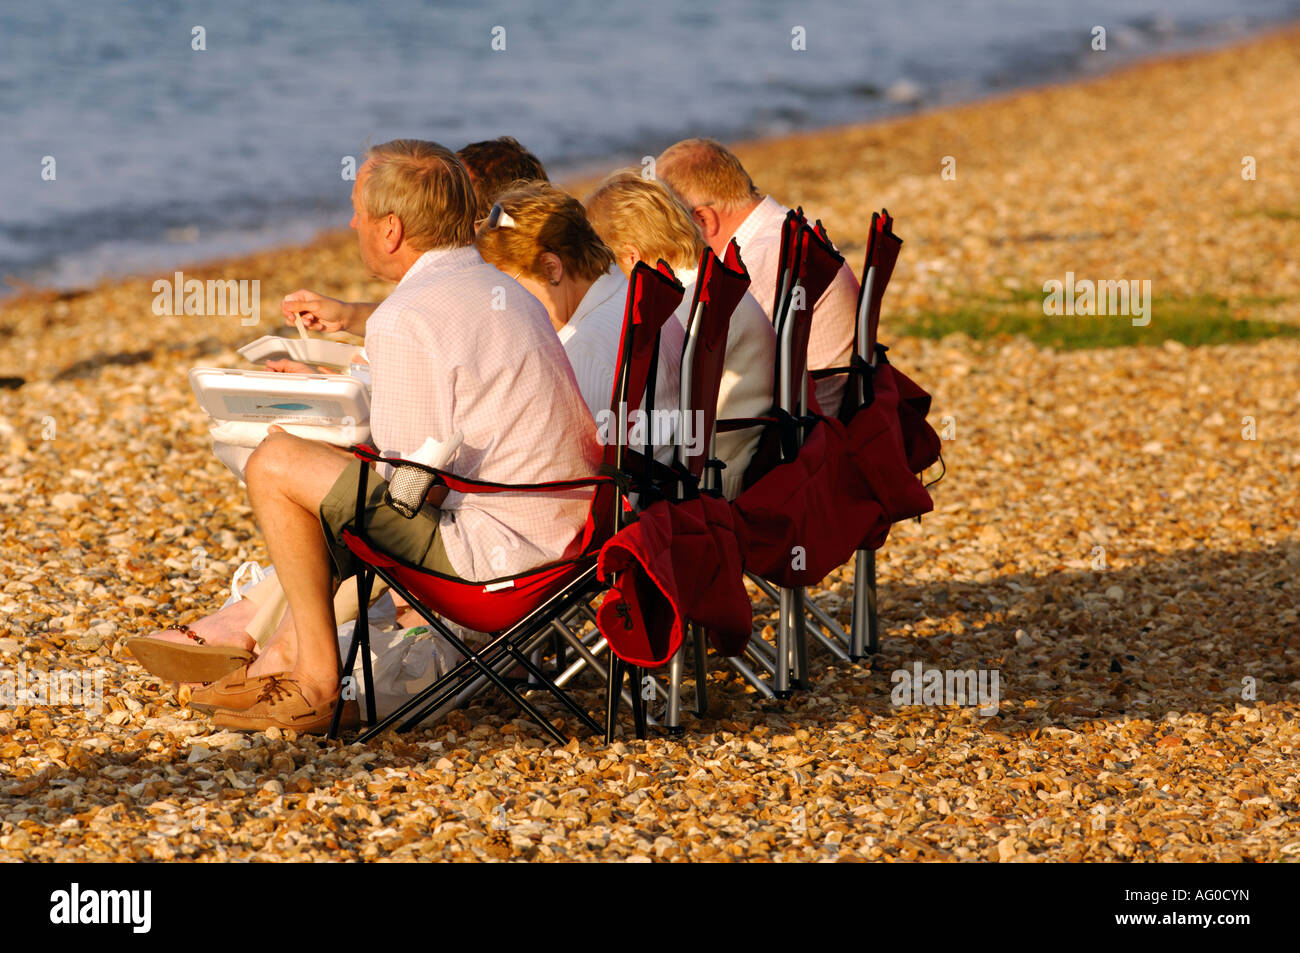 4 four middle aged ladies and gentlemen watching the racing during cowes week regatta on the isle of wight on the beach seaside Stock Photo